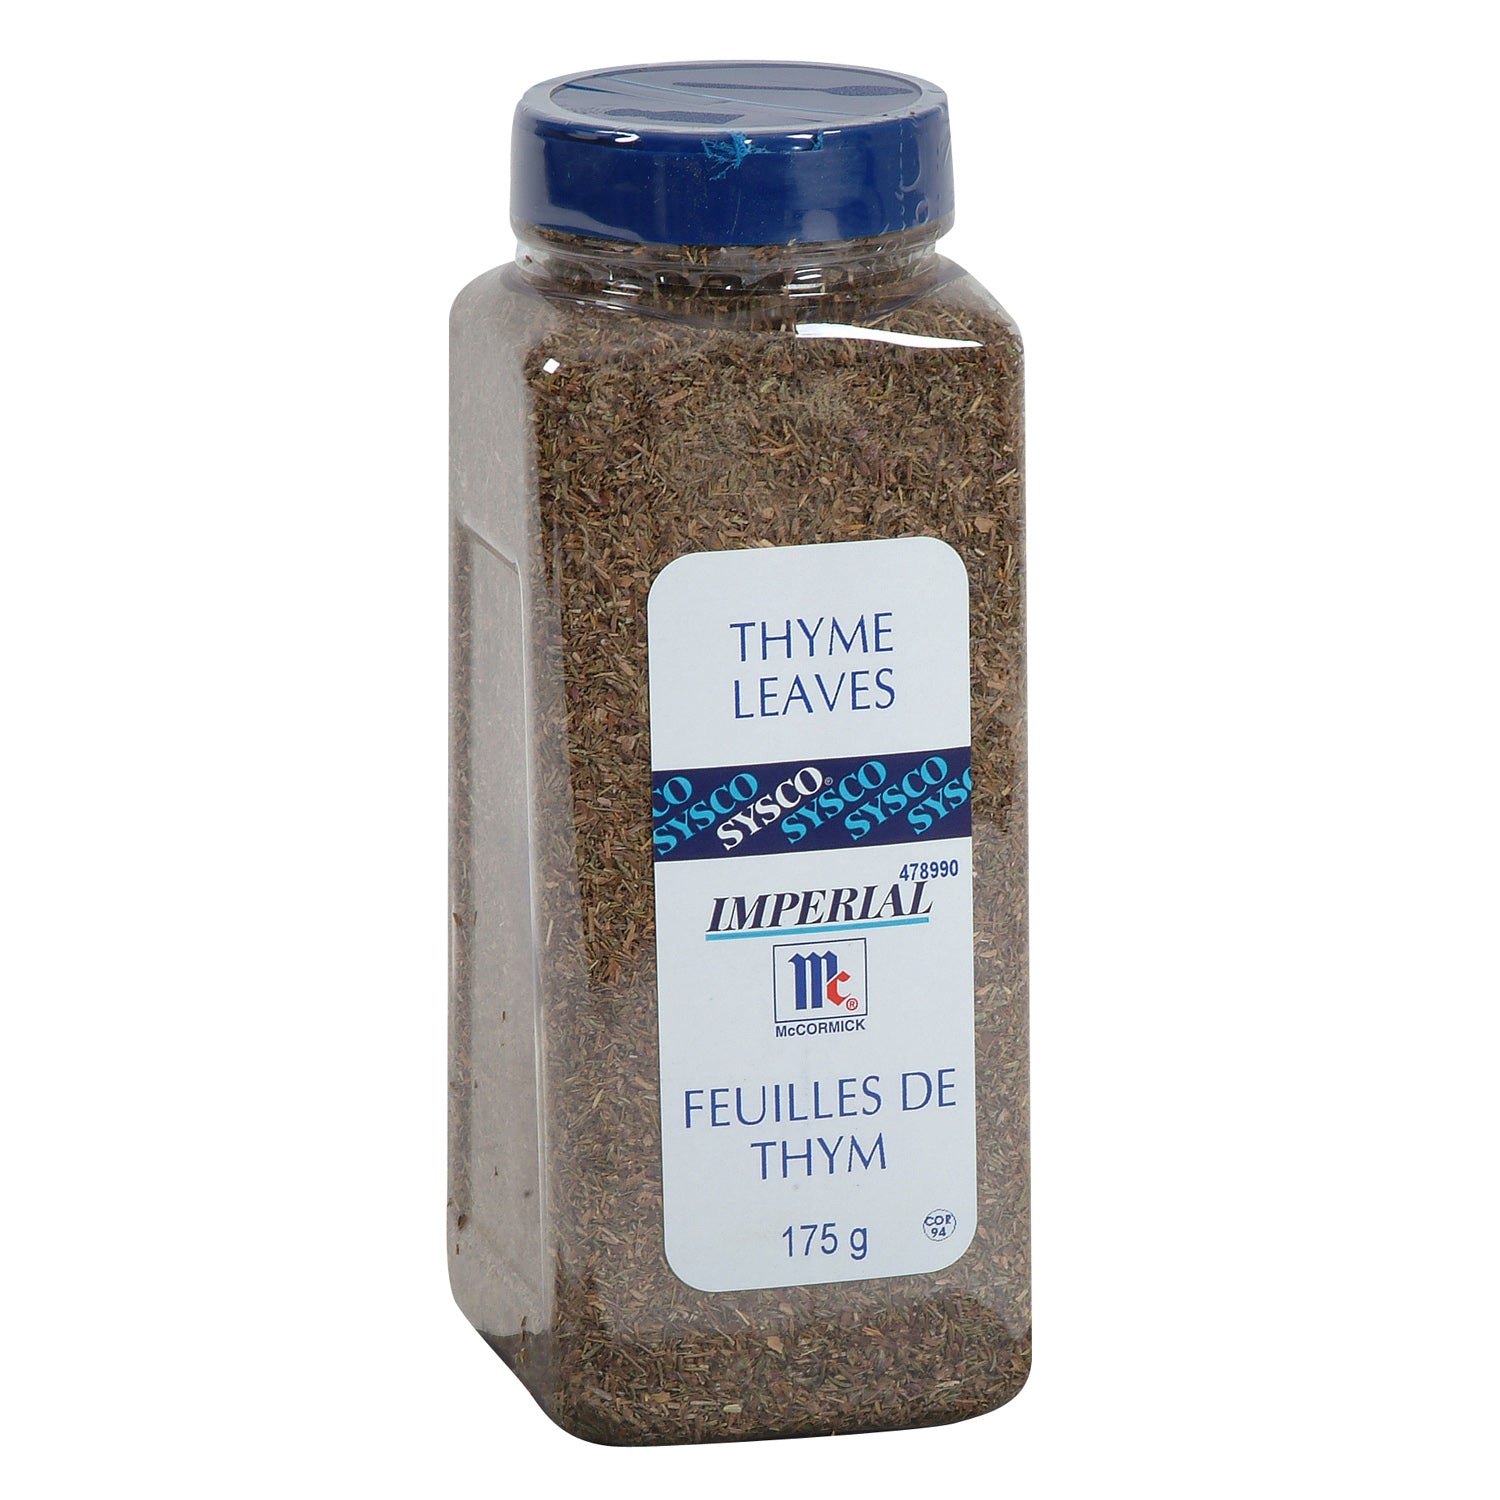 Sysco Imperial Thyme Leaves 175g [$6.28/100g]